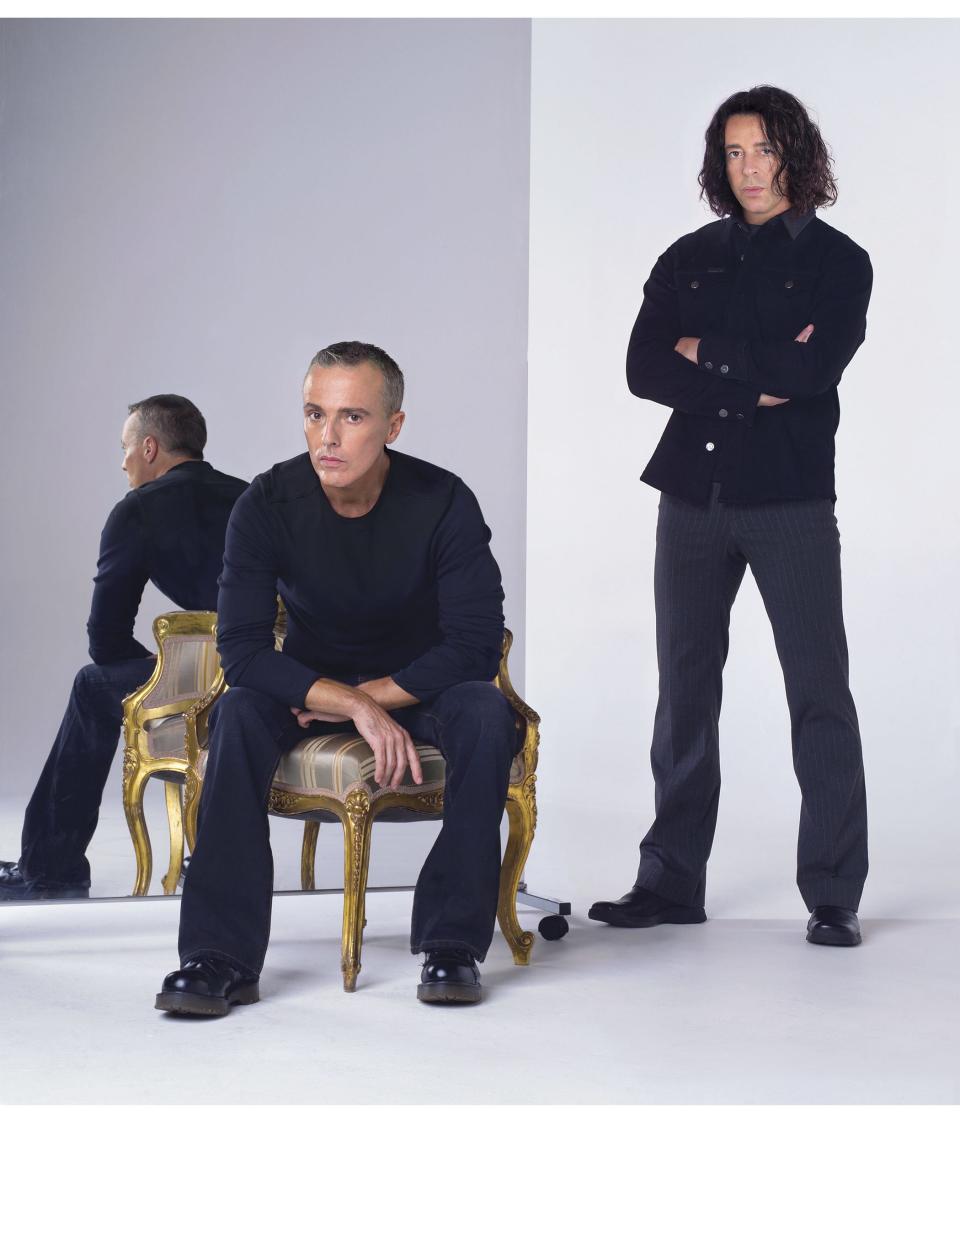 The chair doesn't look that big: Curt Smith, left, and Roland Orzabal of Tears for Fears.